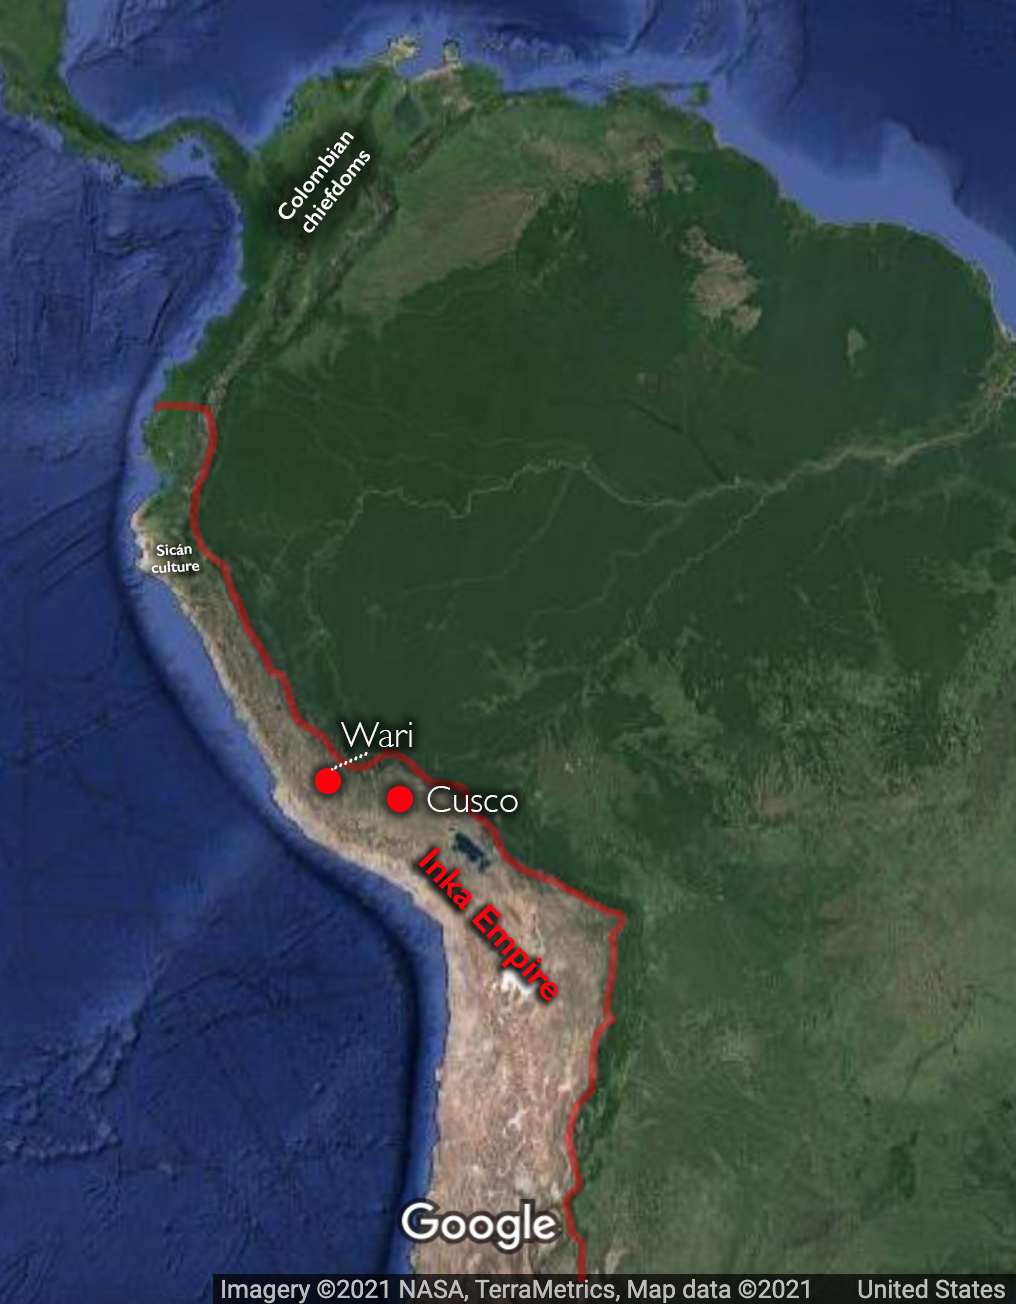 Map of South America with cultures and cities indicated (underlying map © Google)